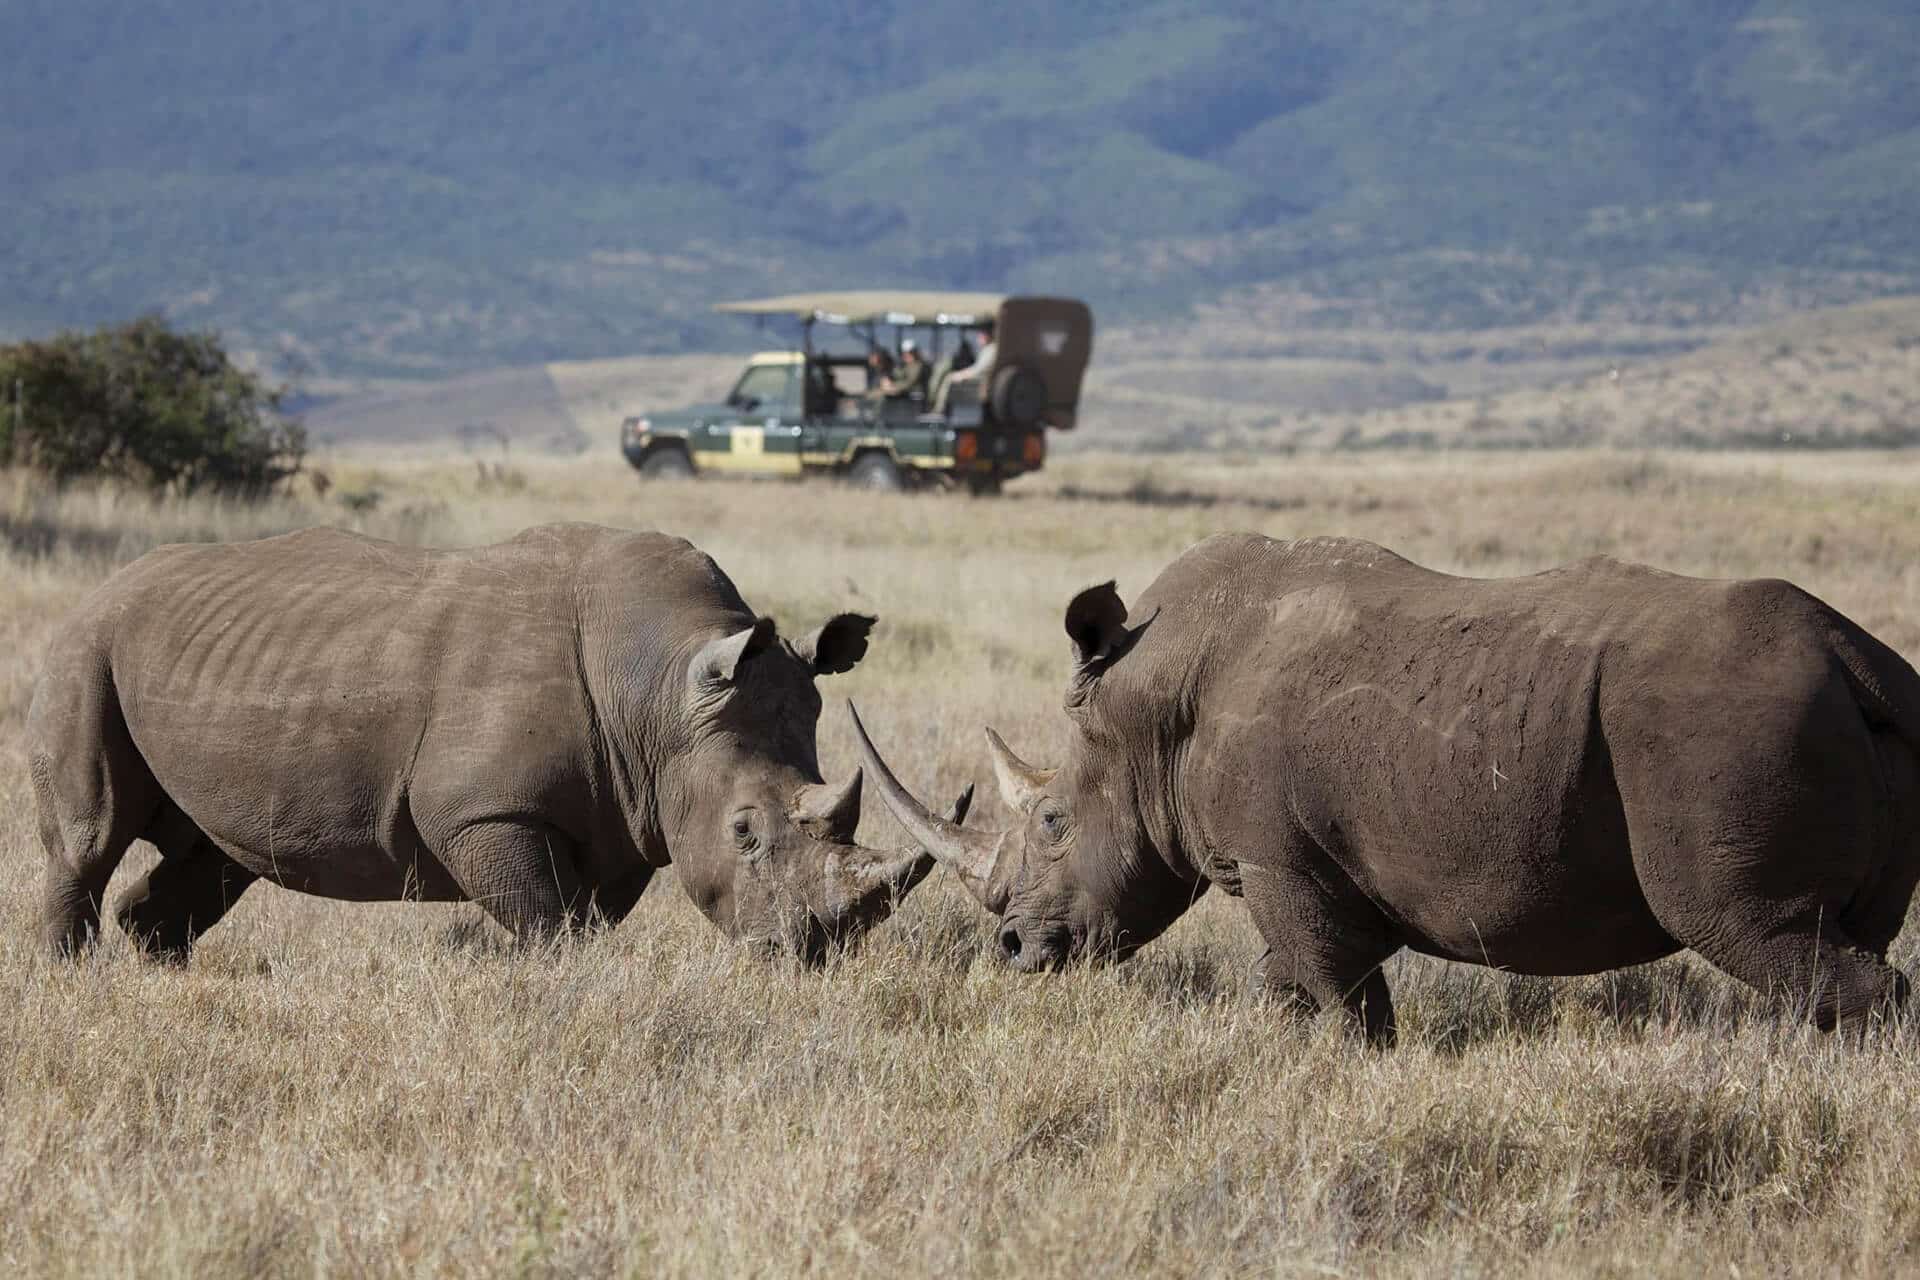 Two large black rhinos and a safari vehicle in Lewa Wildlife Conservancy